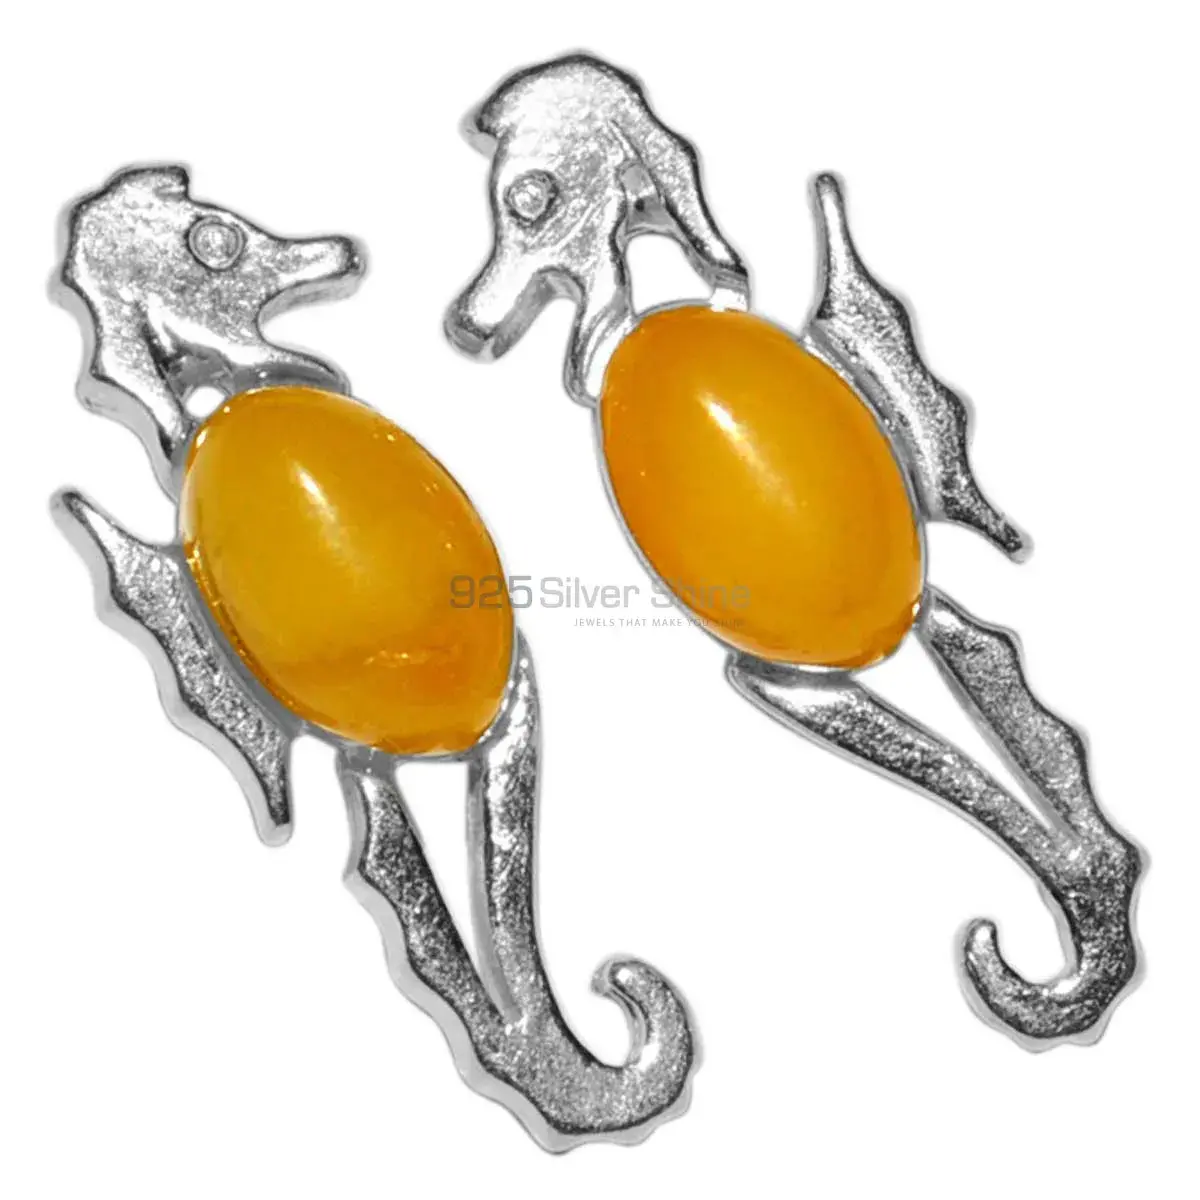 High Quality 925 Sterling Silver Earrings In Amber Gemstone Jewelry 925SE2931_1